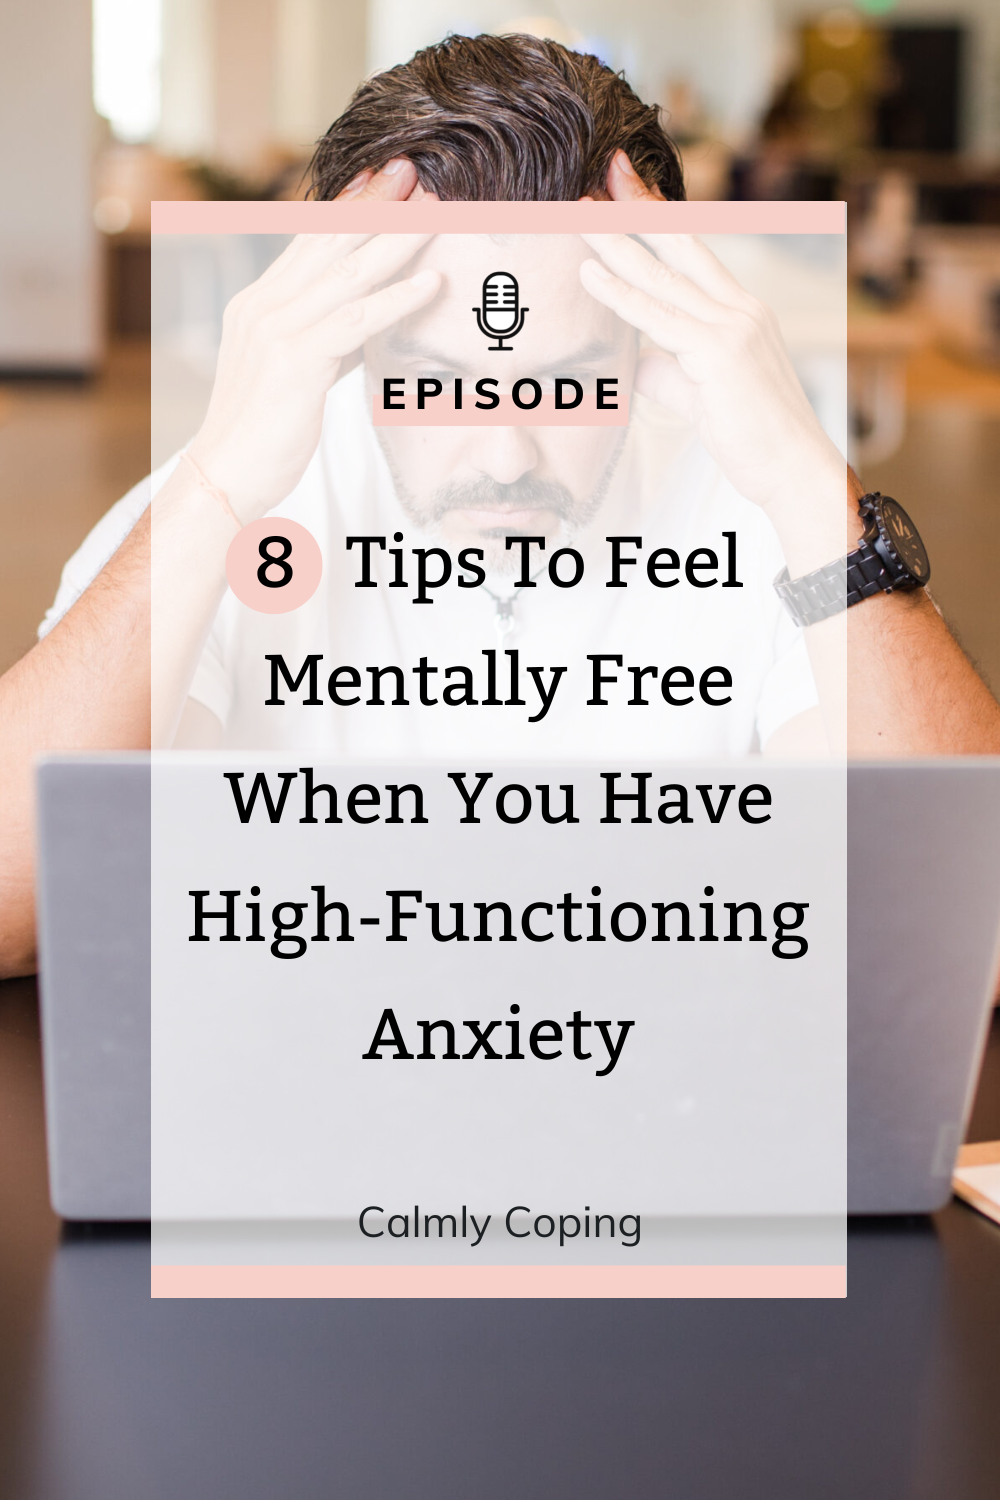 8 Tips To Feel Mentally Free When You Have High-Functioning Anxiety